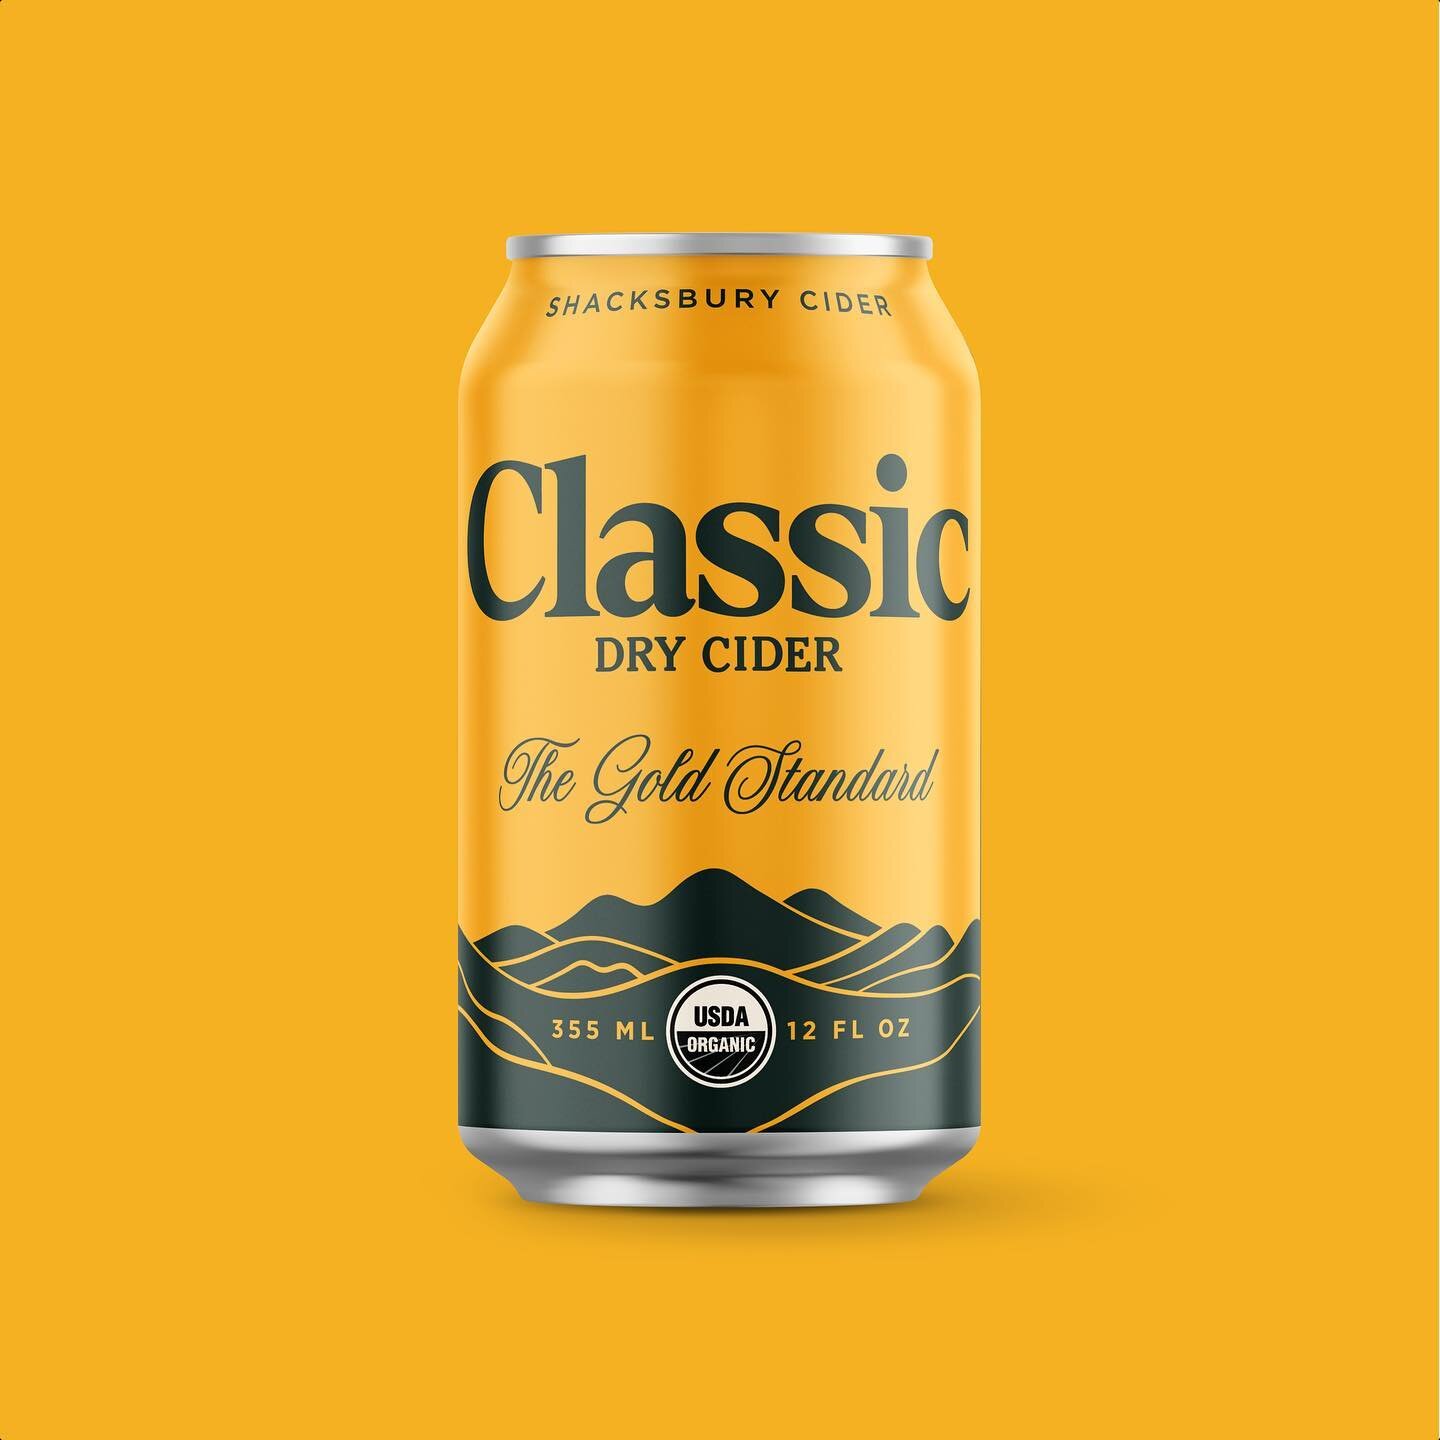 We dressed up our Dry cider to bring you Classic, the gold standard for a New England dry cider. ✨🌟🏆

Made with organic apples, our Classic dry cider is golden in color and balanced in flavor. Equally at home at the dinner table as it is in your co